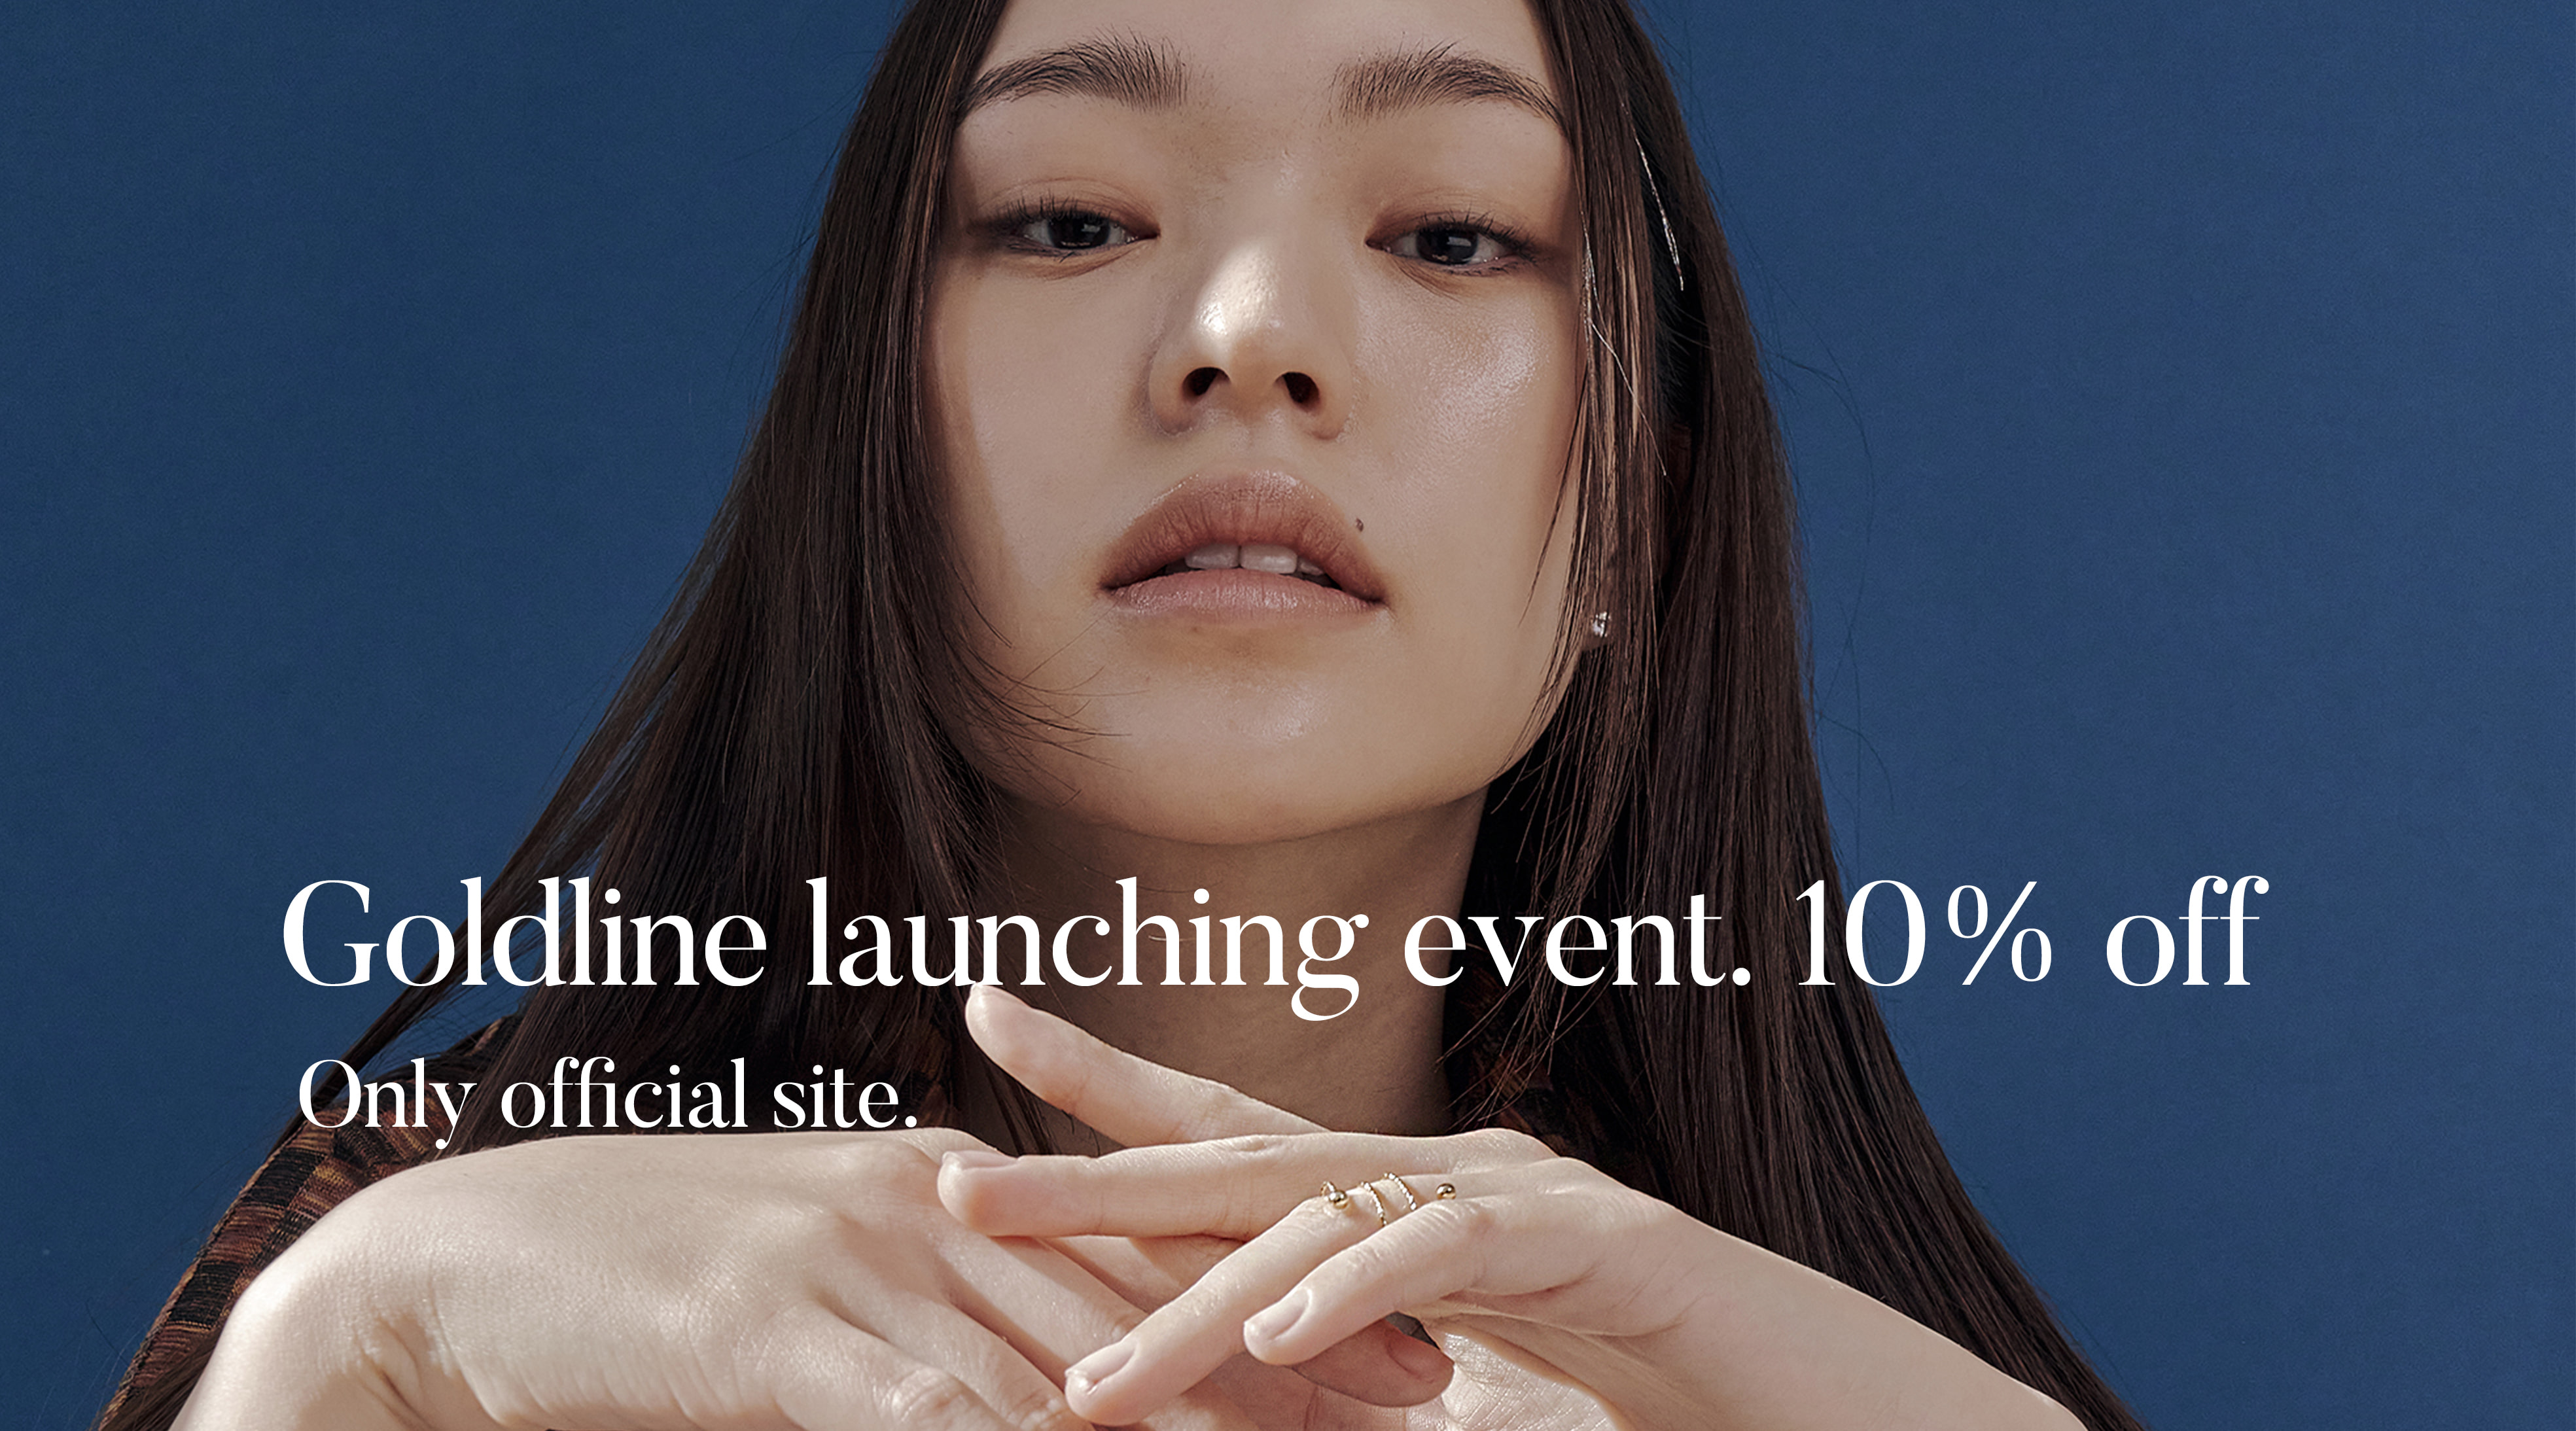 Goldline launching event. 10% off